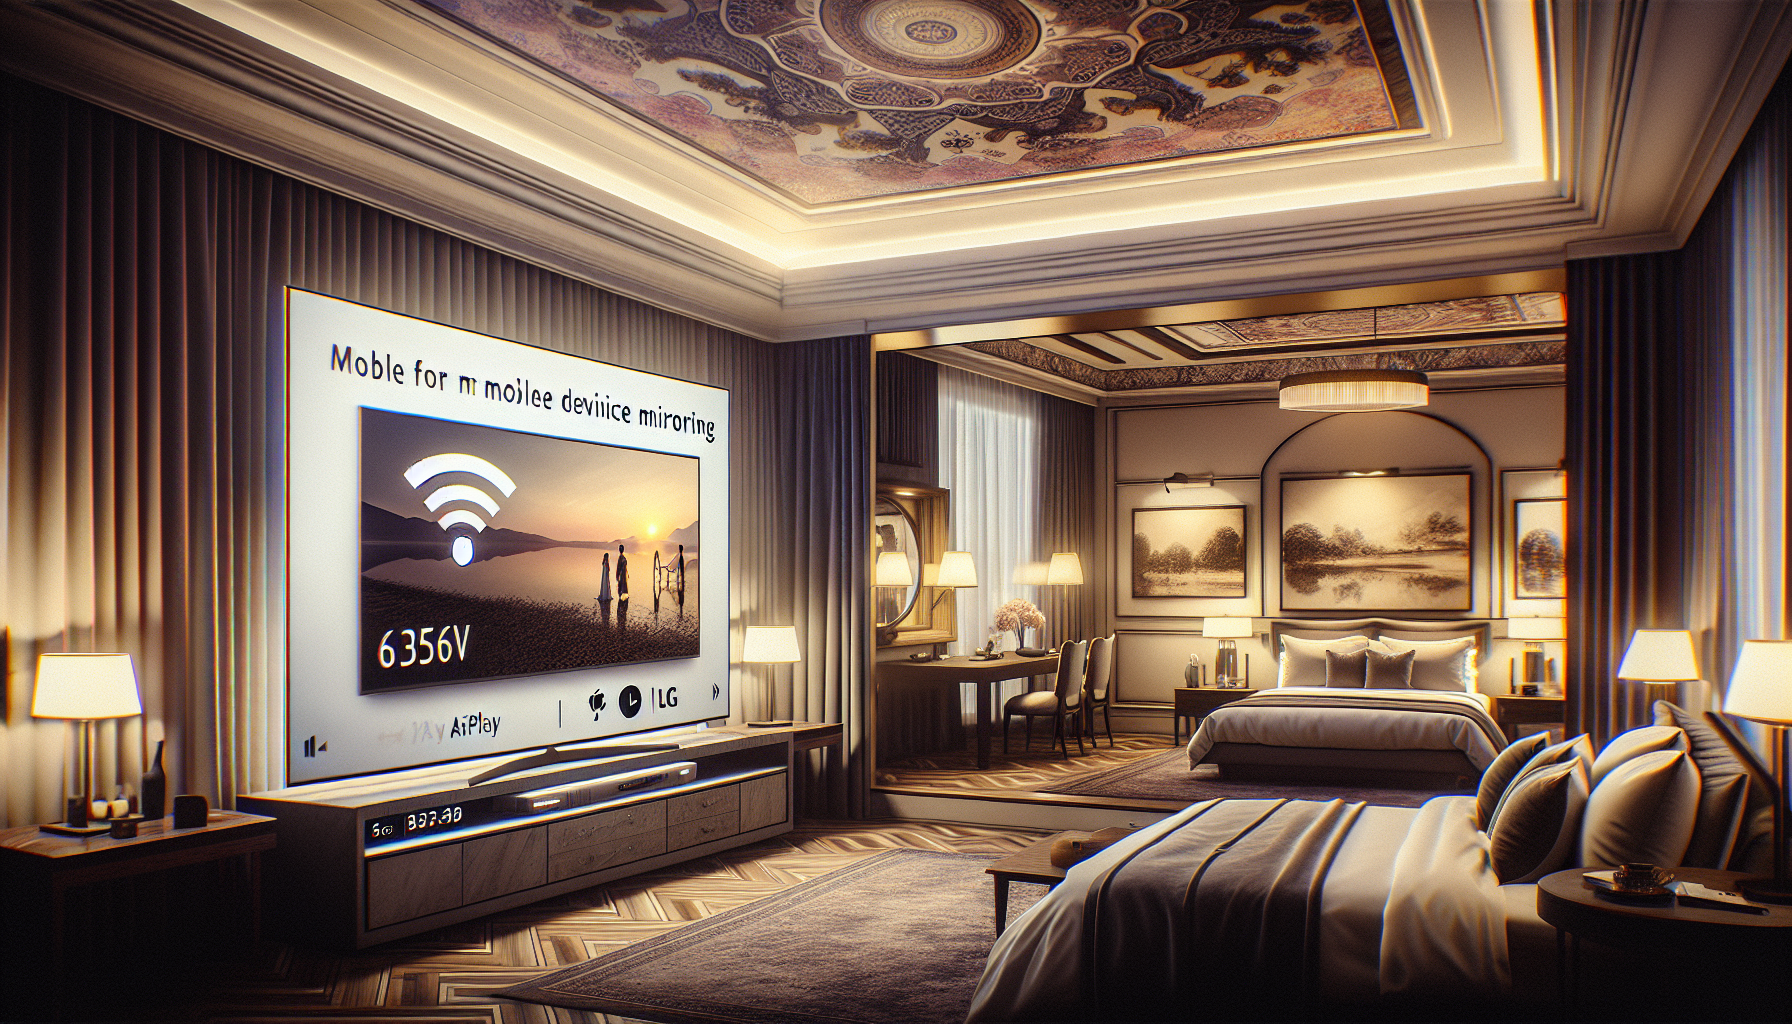 Samsung Broadens AirPlay Support in Hotel Rooms, Mirroring LG's Strategy